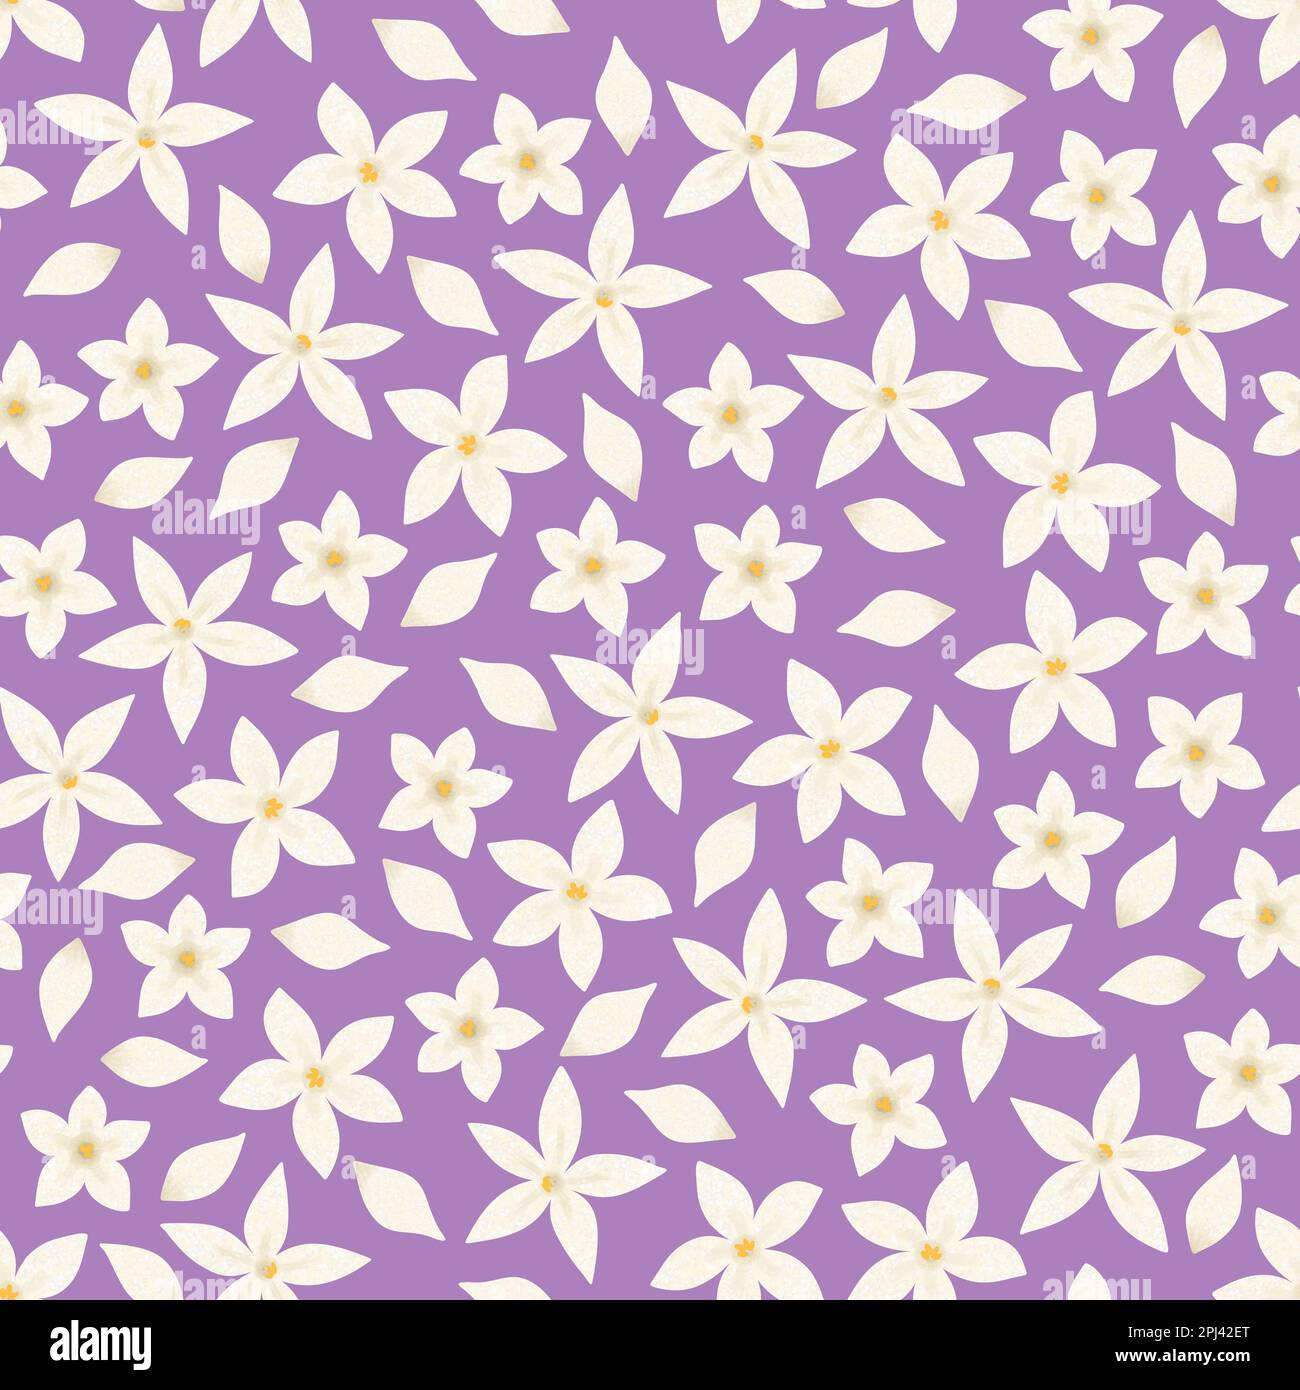 Spring floral seamless pattern. White tiny hand drawn flowers on purple background. Fashion allover illustration Stock Photo